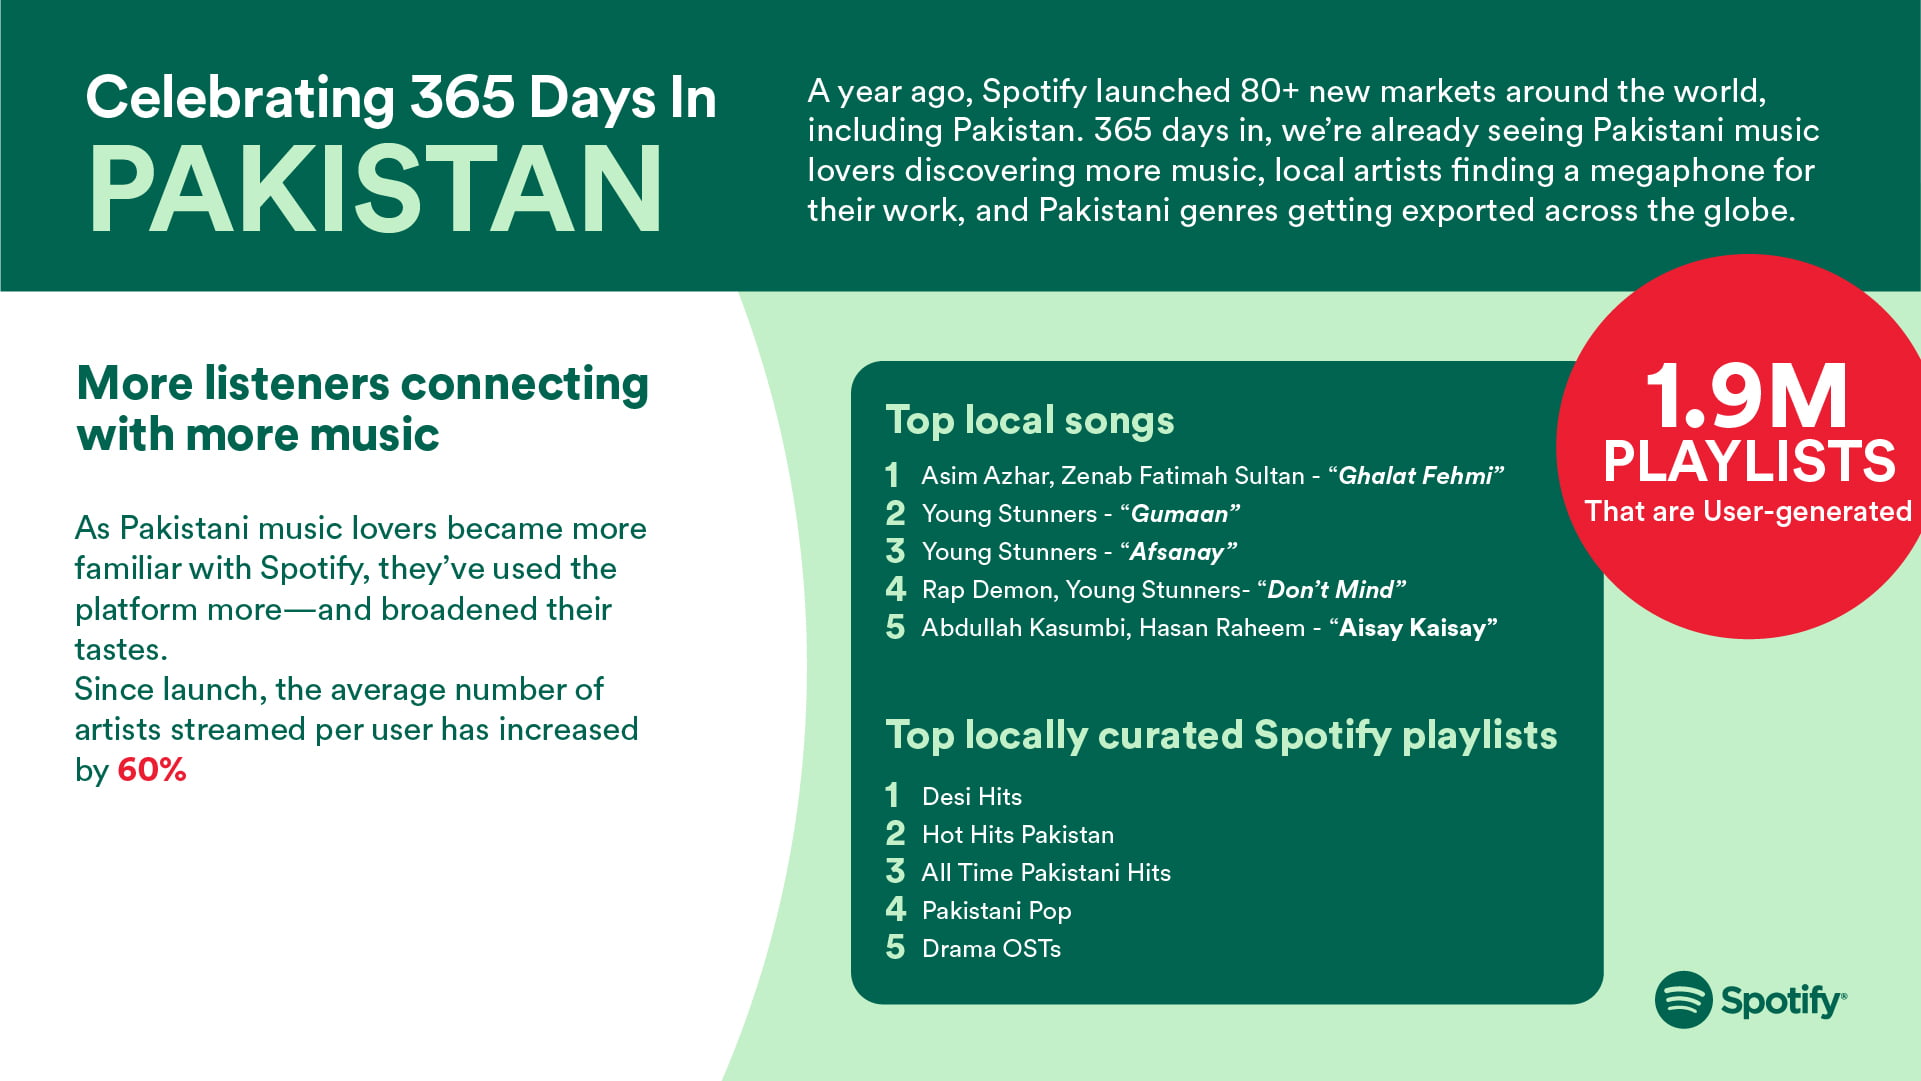 Celebrating one year in Pakistan, Spotify reveals exciting insights on local music trends